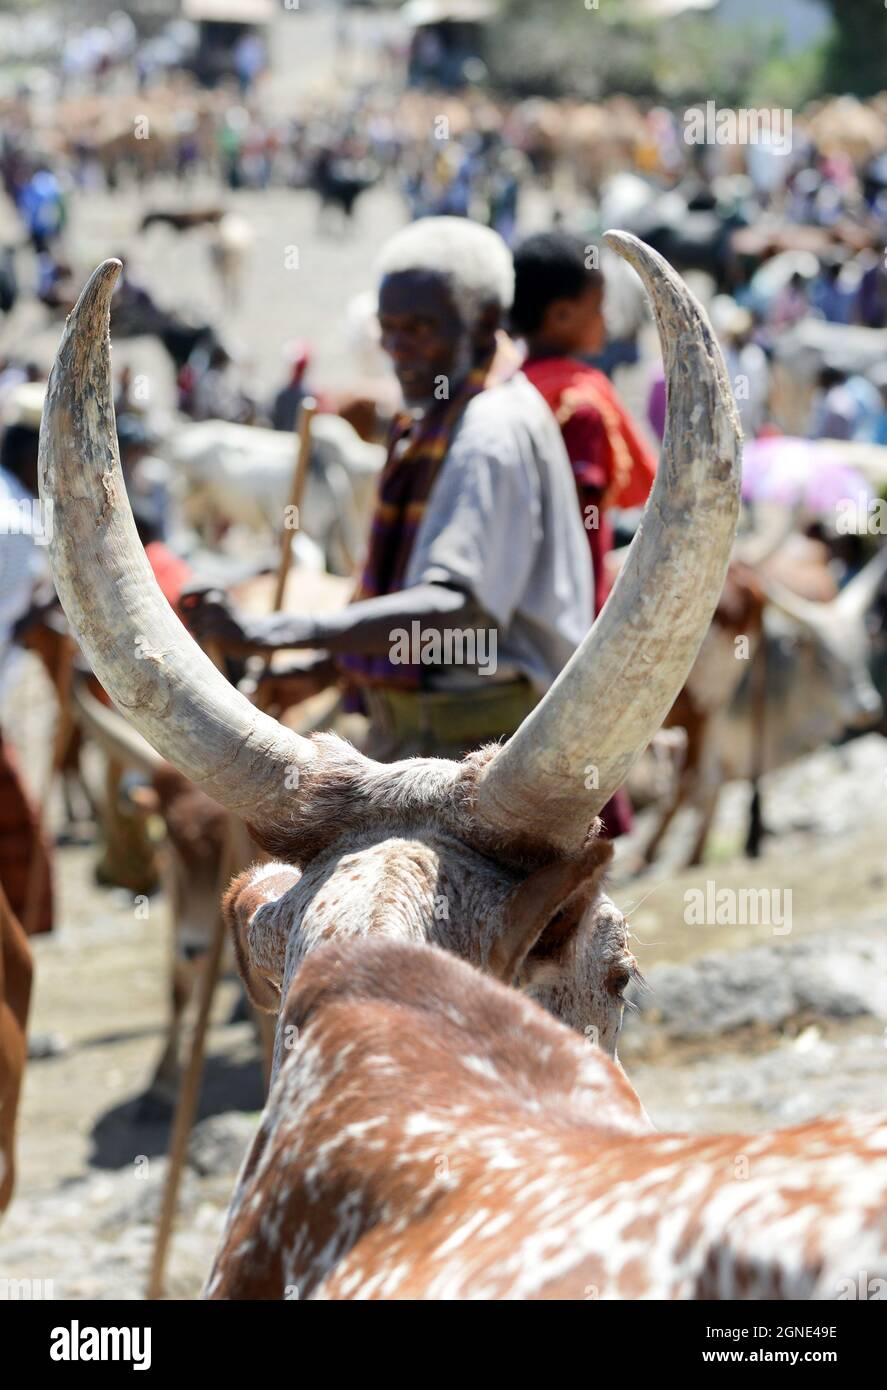 The colorful cattle market at the weekly market in Bati, Ethiopia. Stock Photo